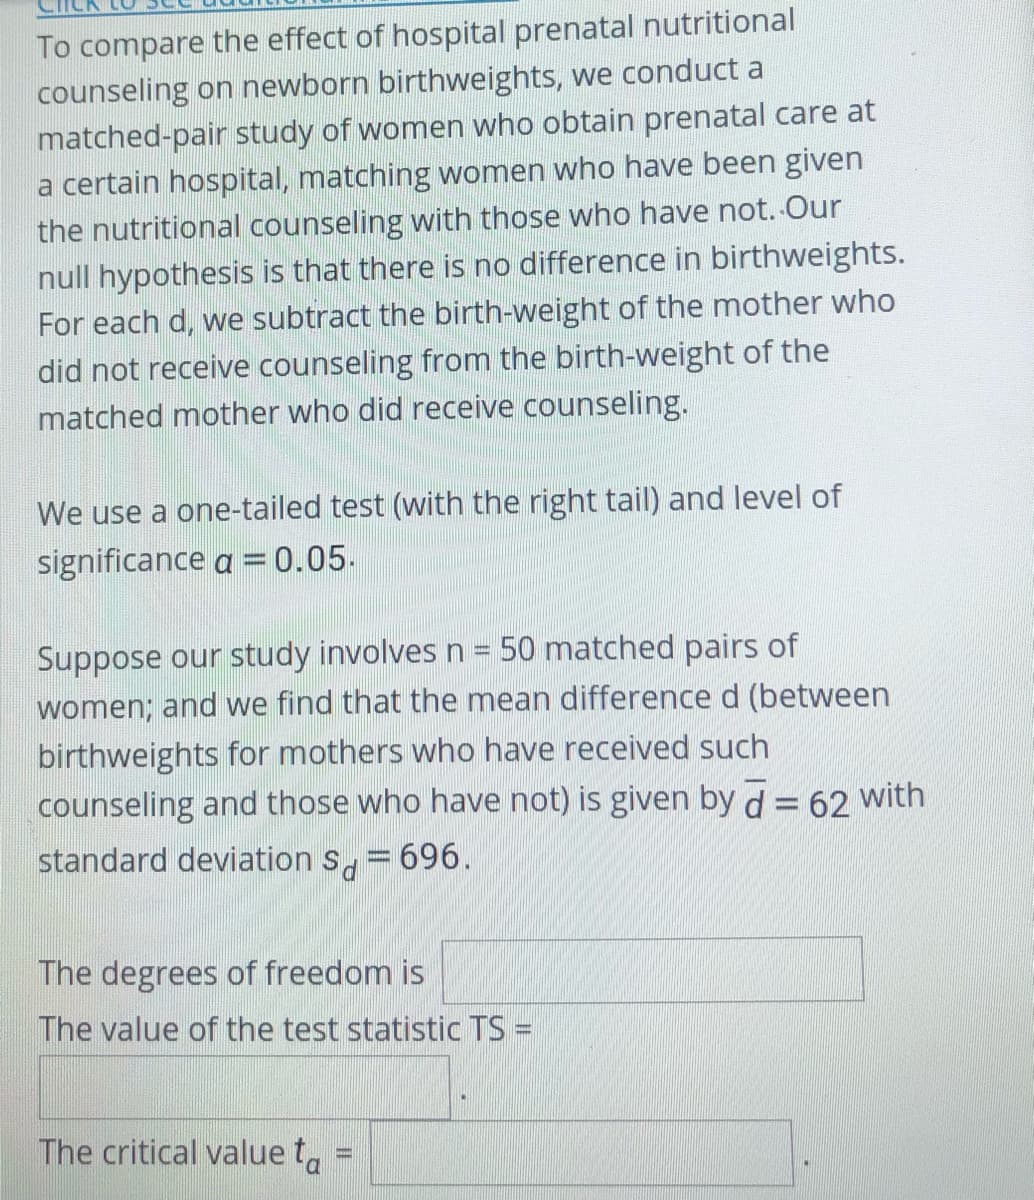 To compare the effect of hospital prenatal nutritional
counseling on newborn birthweights, we conduct a
matched-pair study of women who obtain prenatal care at
a certain hospital, matching women who have been given
the nutritional counseling with those who have not. Our
null hypothesis is that there is no difference in birthweights.
For each d, we subtract the birth-weight of the mother who
did not receive counseling from the birth-weight of the
matched mother who did receive counseling.
We use a one-tailed test (with the right tail) and level of
significance a =0.05.
Suppose our study involves n = 50 matched pairs of
women; and we find that the mean difference d (between
birthweights for mothers who have received such
counseling and those who have not) is given by d = 62 with
standard deviation s, = 696.
The degrees of freedom is
The value of the test statistic TS =
The critical value t,
